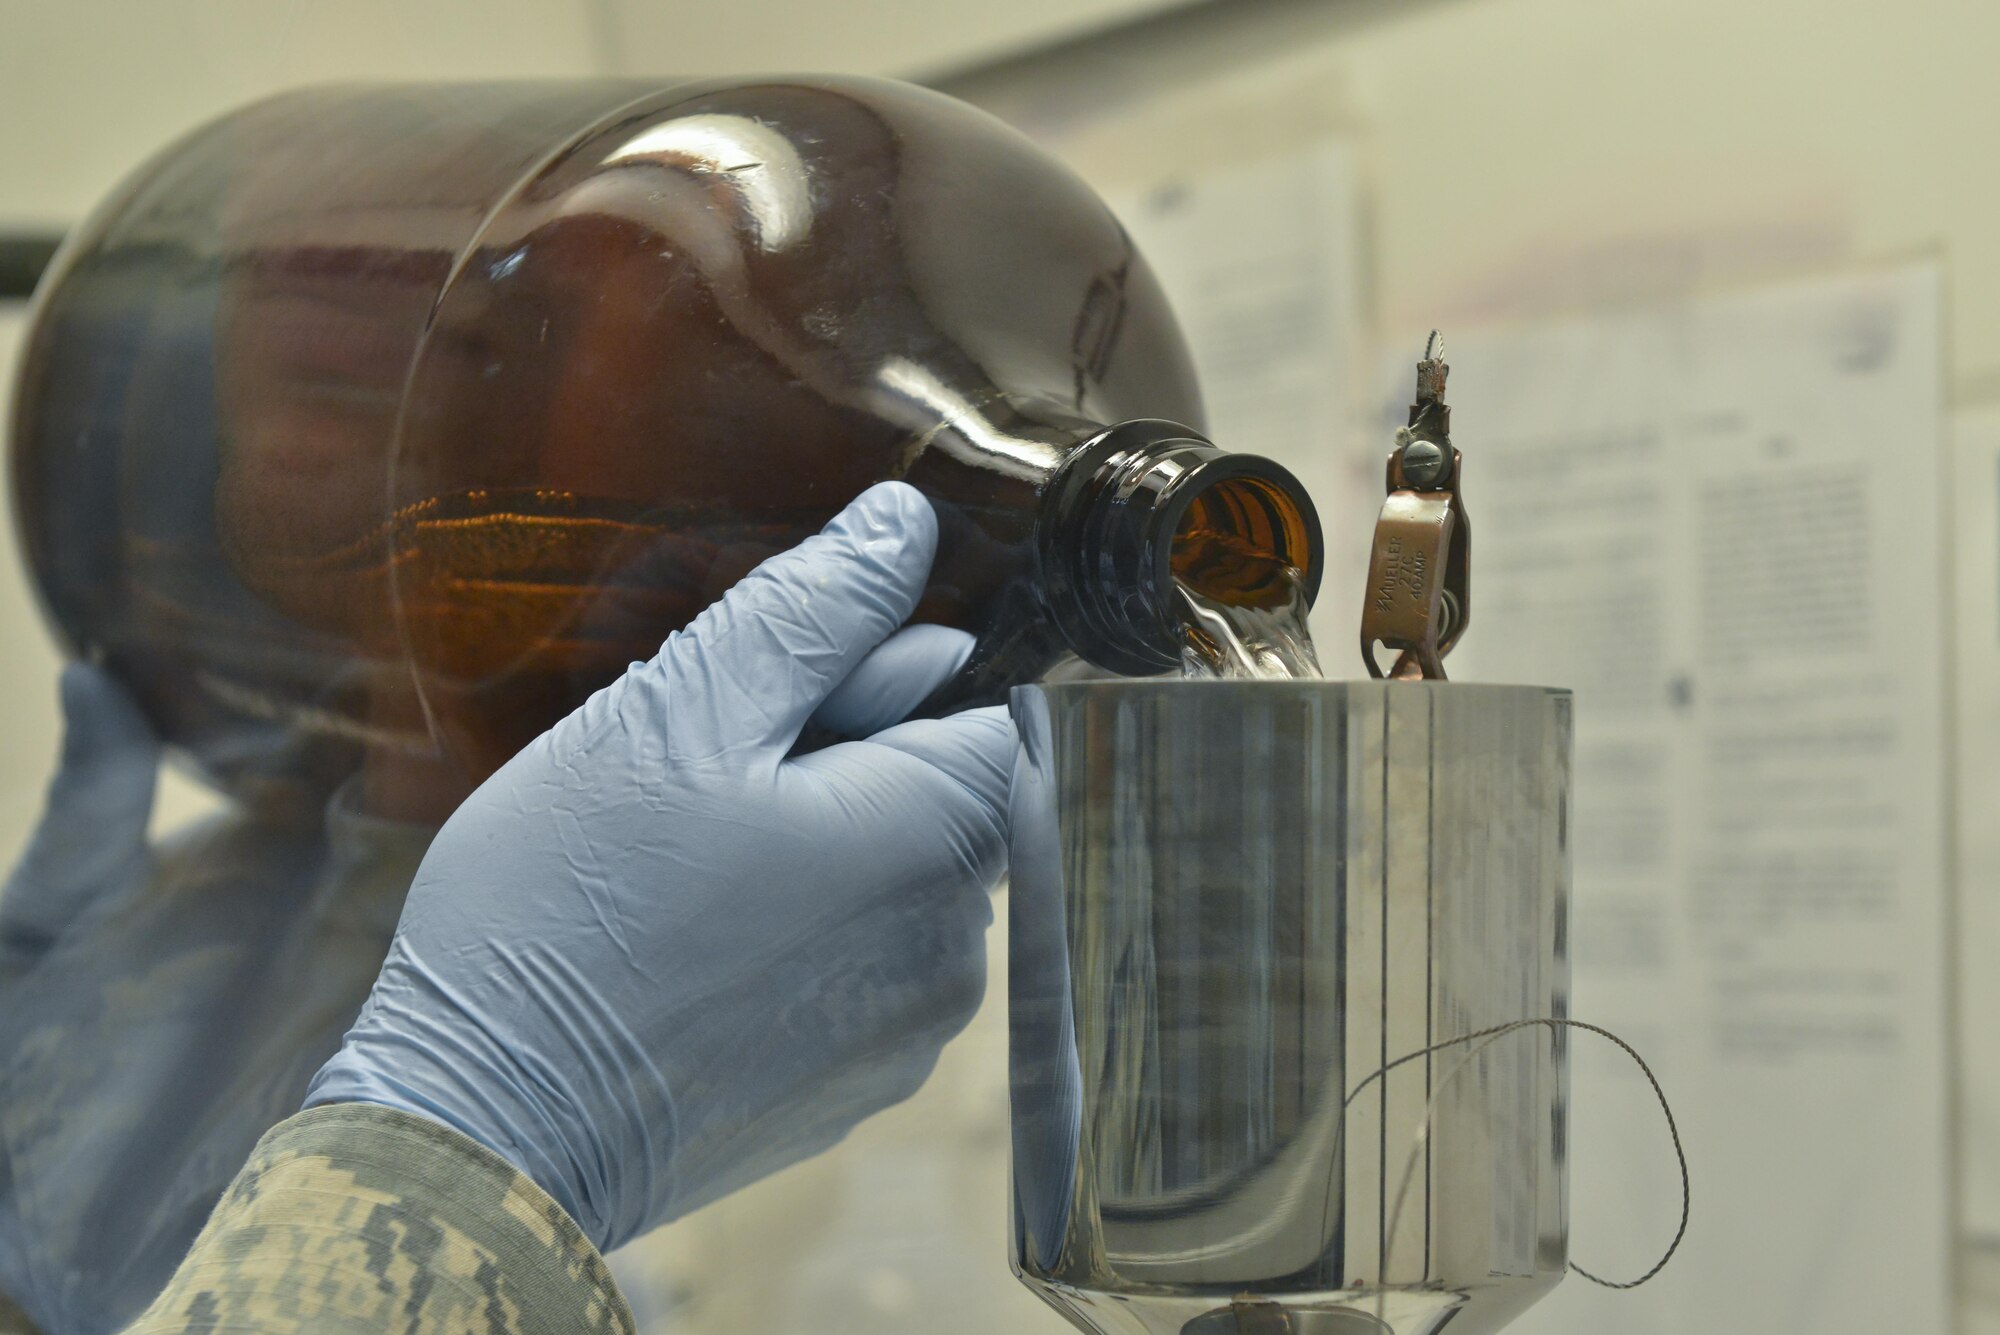 Staff Sgt. David Ramirez, 379th Expeditionary Logistic Readiness fuels laboratory, pours jet petroleum 8 through a funnel that will filter the fuels to test for particles August 18, 2015 at Al Udeid Air Base, Qatar. The base fuels laboratory at Al Udeid tests all petroleum that is used in aircraft, vehicles and generators throughout the installation to safeguard its quality, performance and safety. (U.S. Air Force photo/ Staff Sgt. Alexandre Montes)